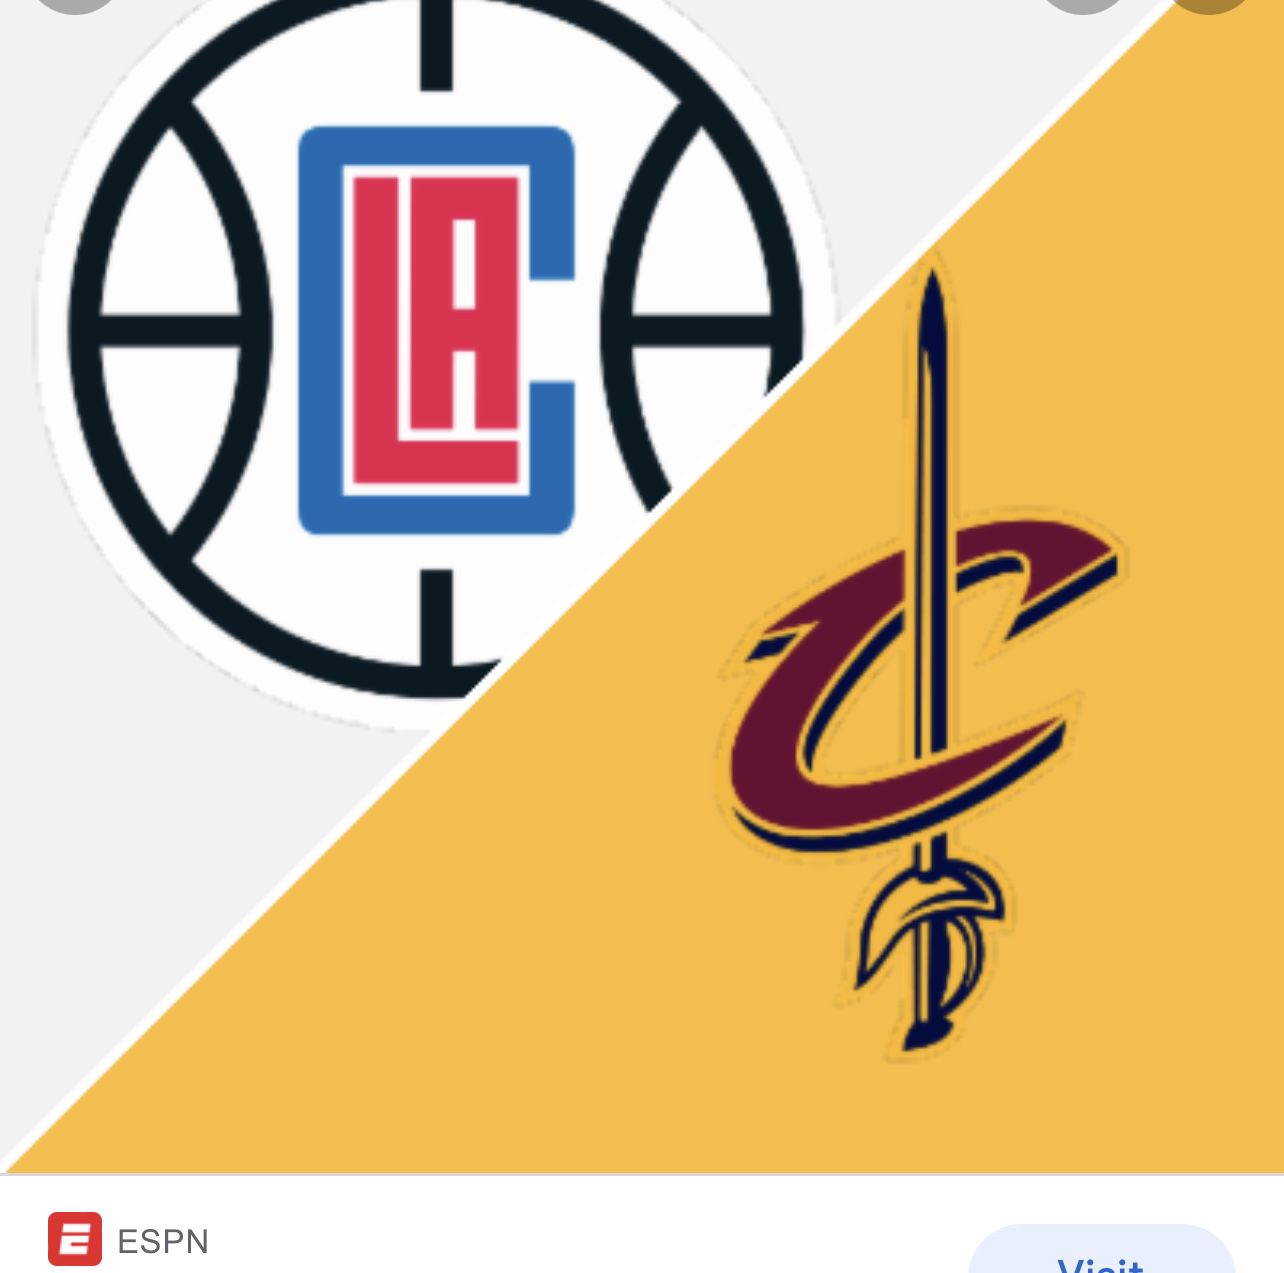 Clippers vs Cavs - $80  for both tickets